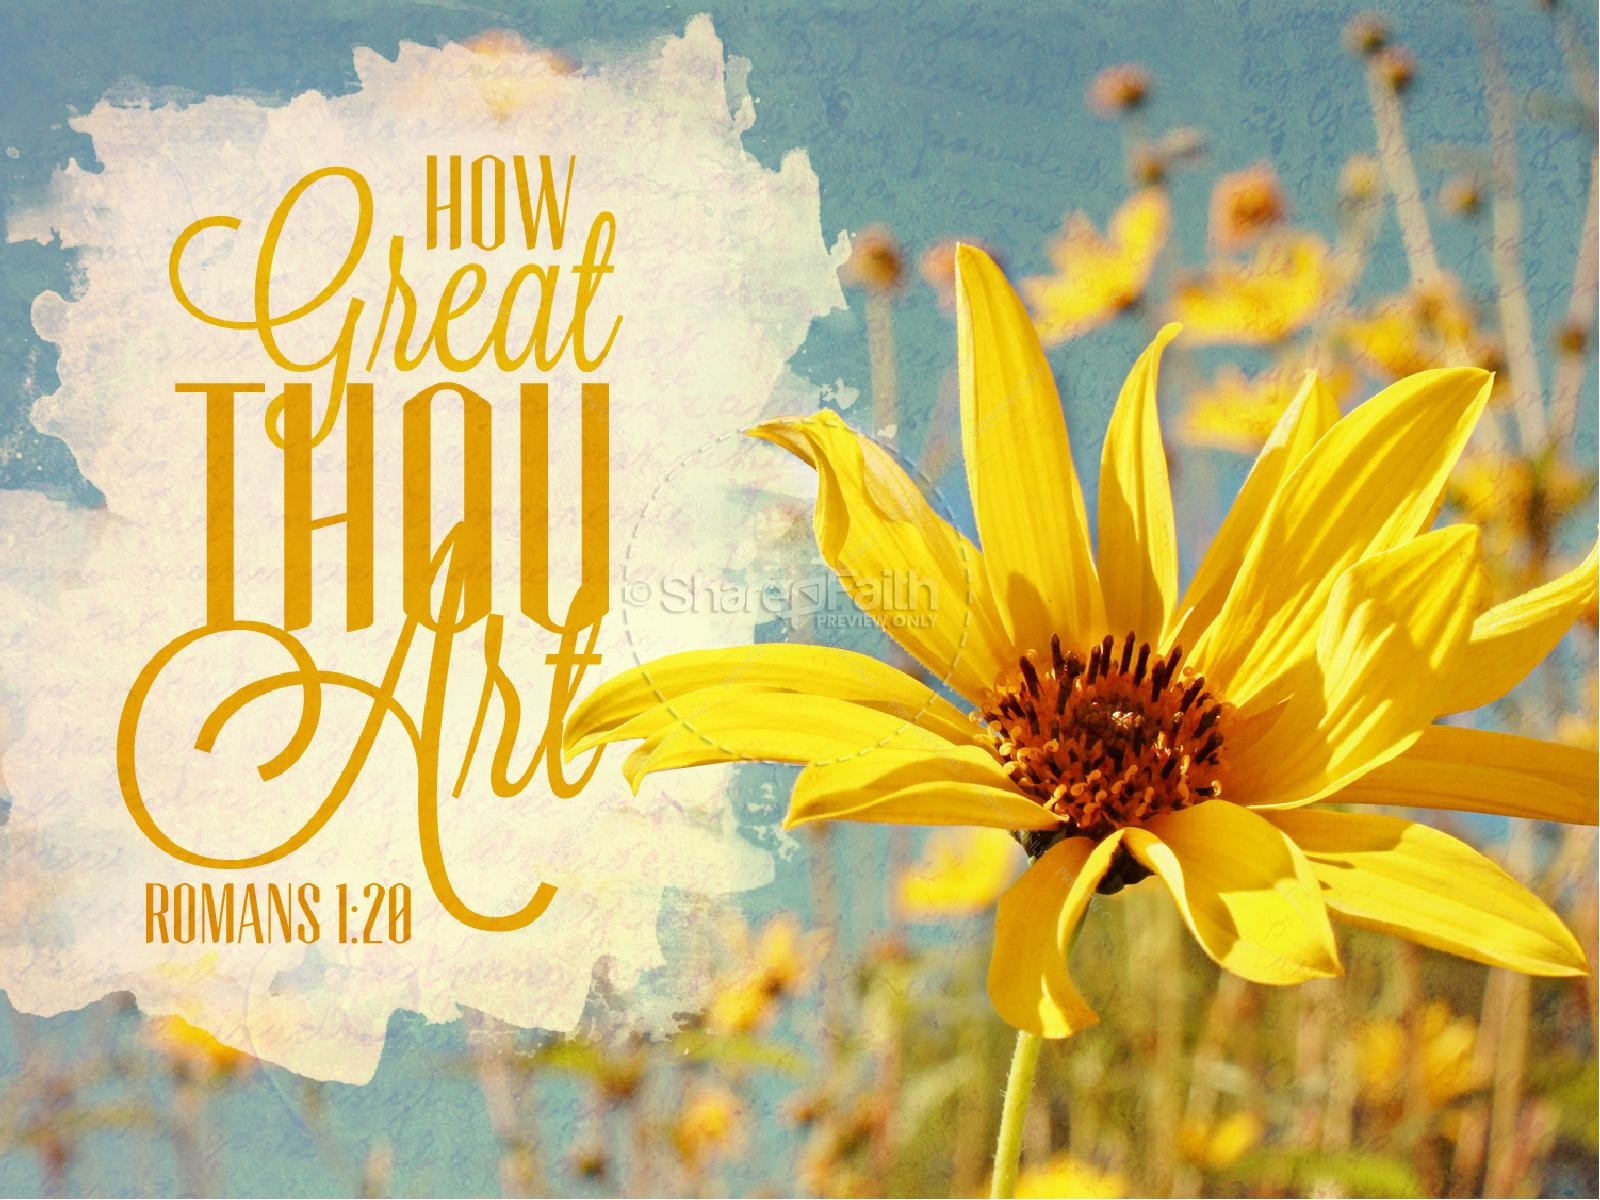 how great thou art,yellow,nature,scenery,flower,romans 1:20,floral,grow,spr...